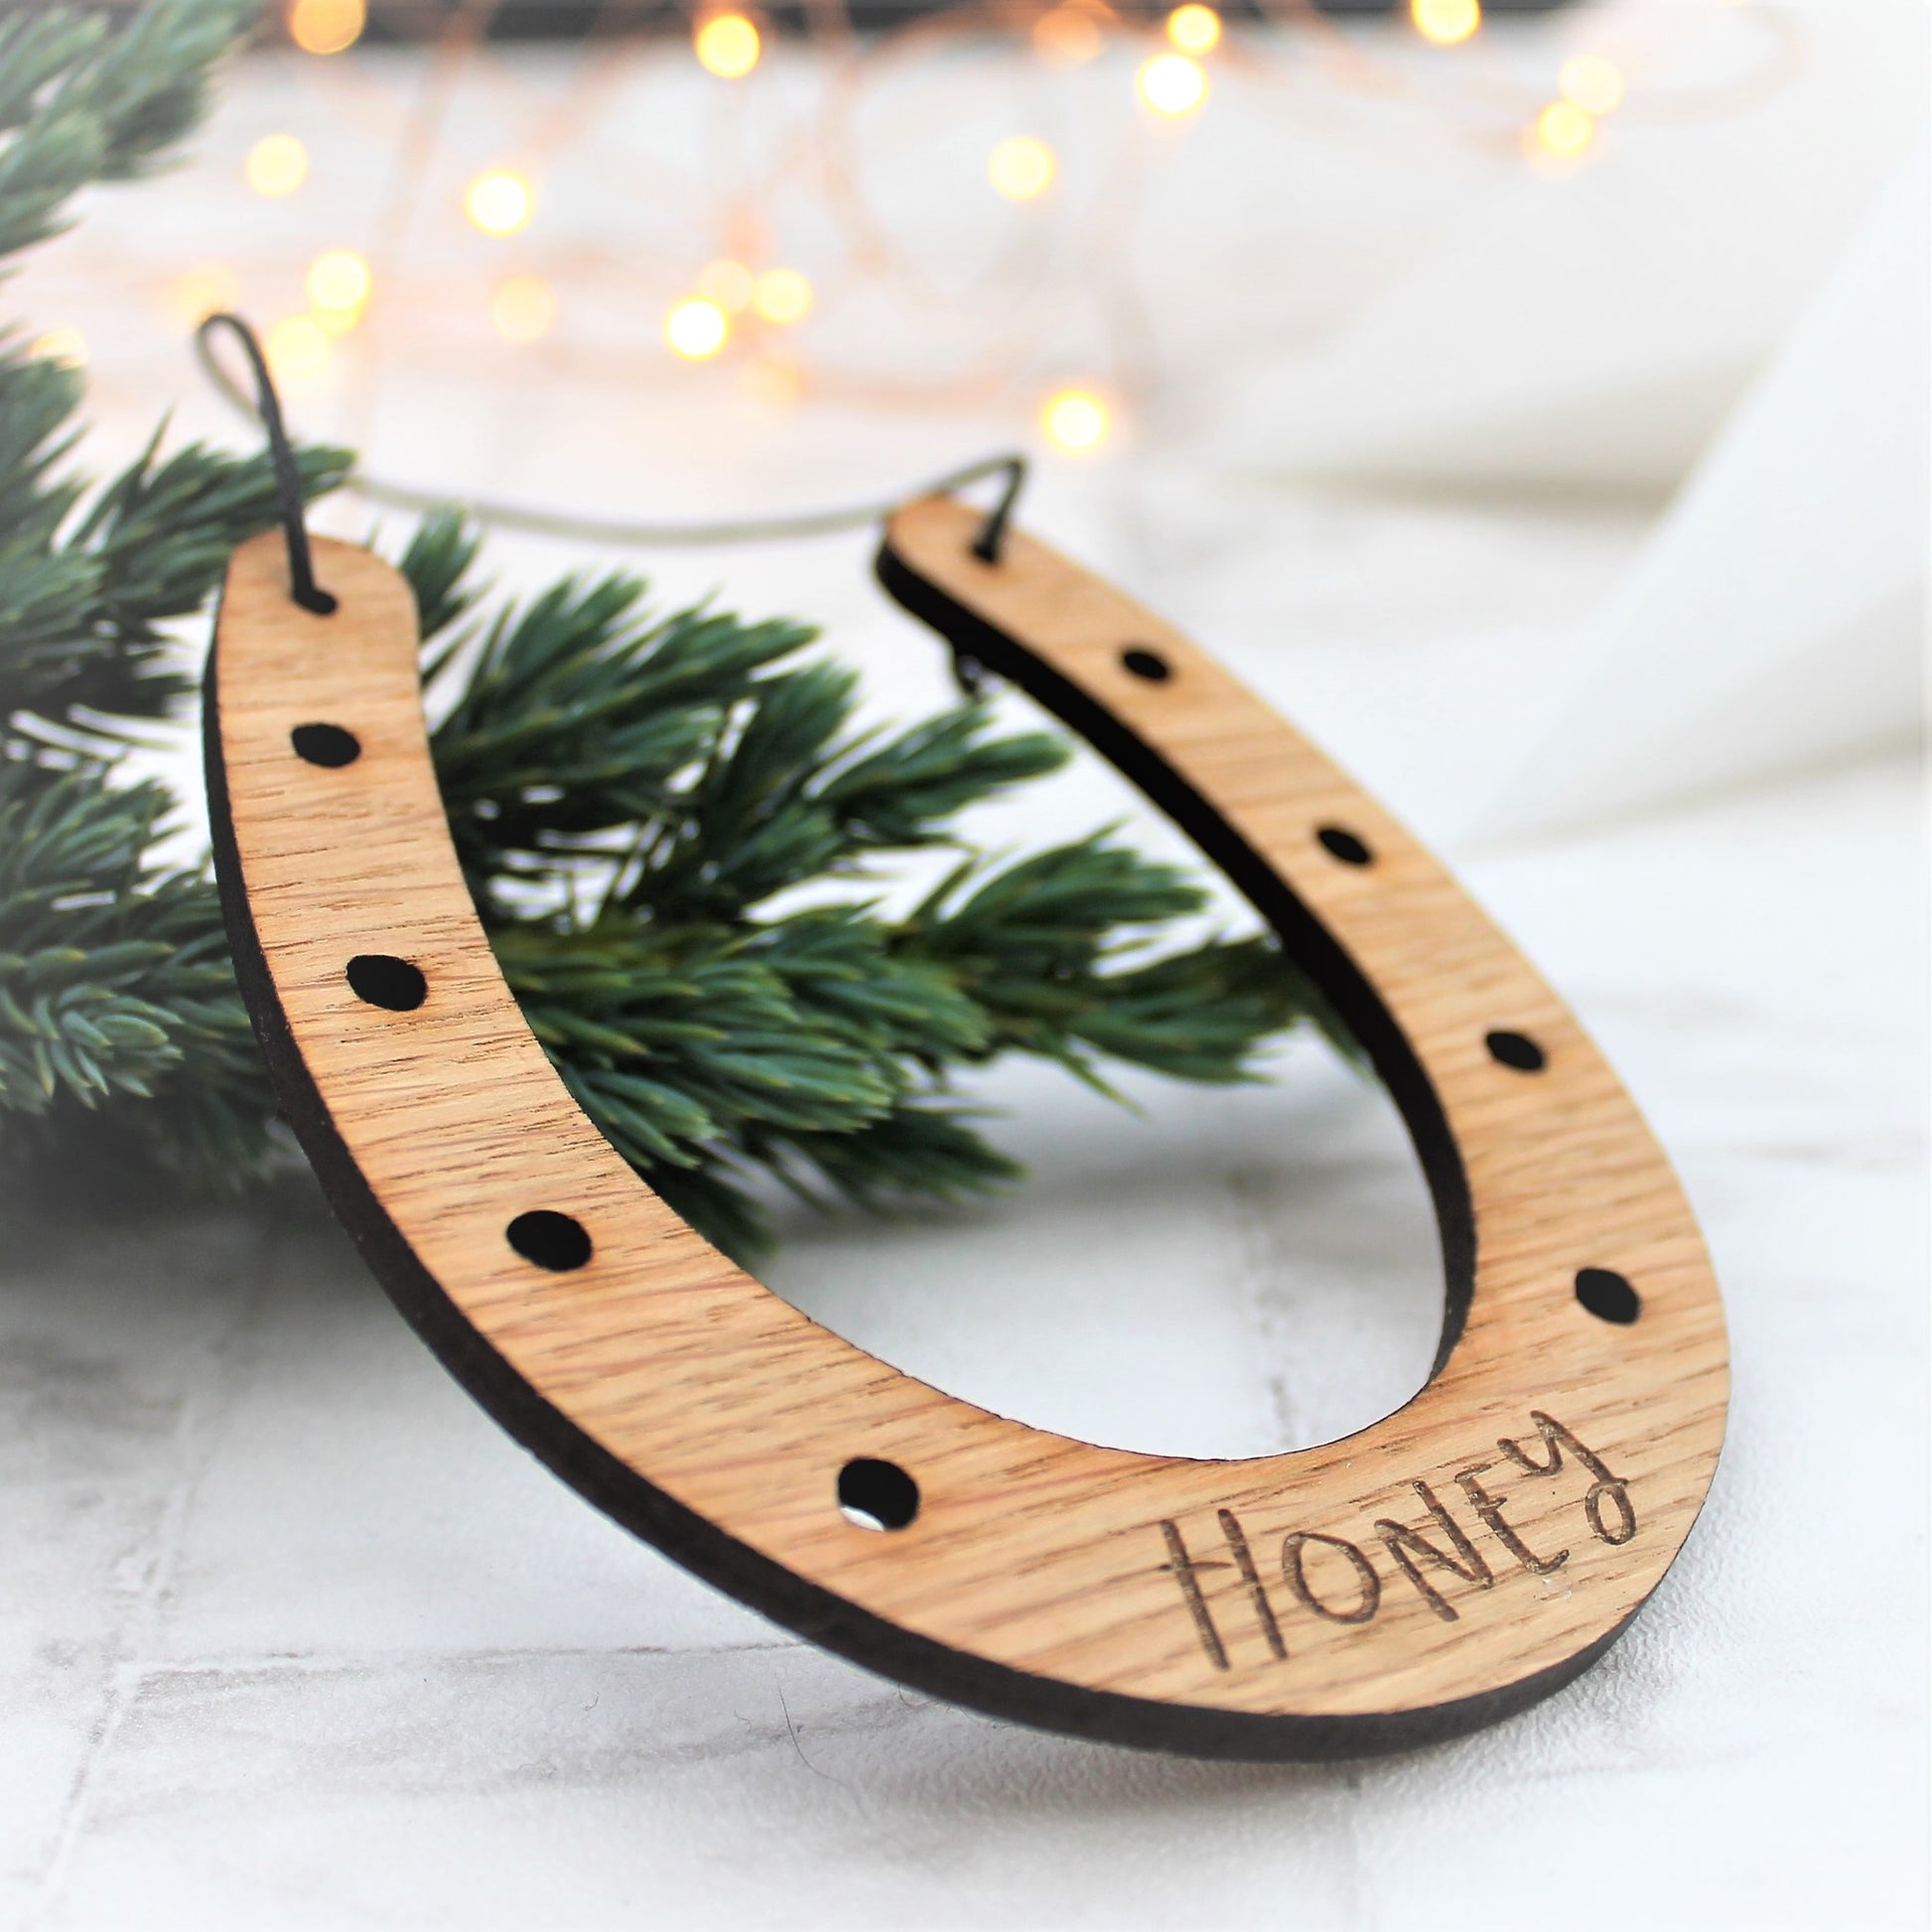 Wooden engraved horseshoe Christmas tree decoration with personalised name etched onto it.